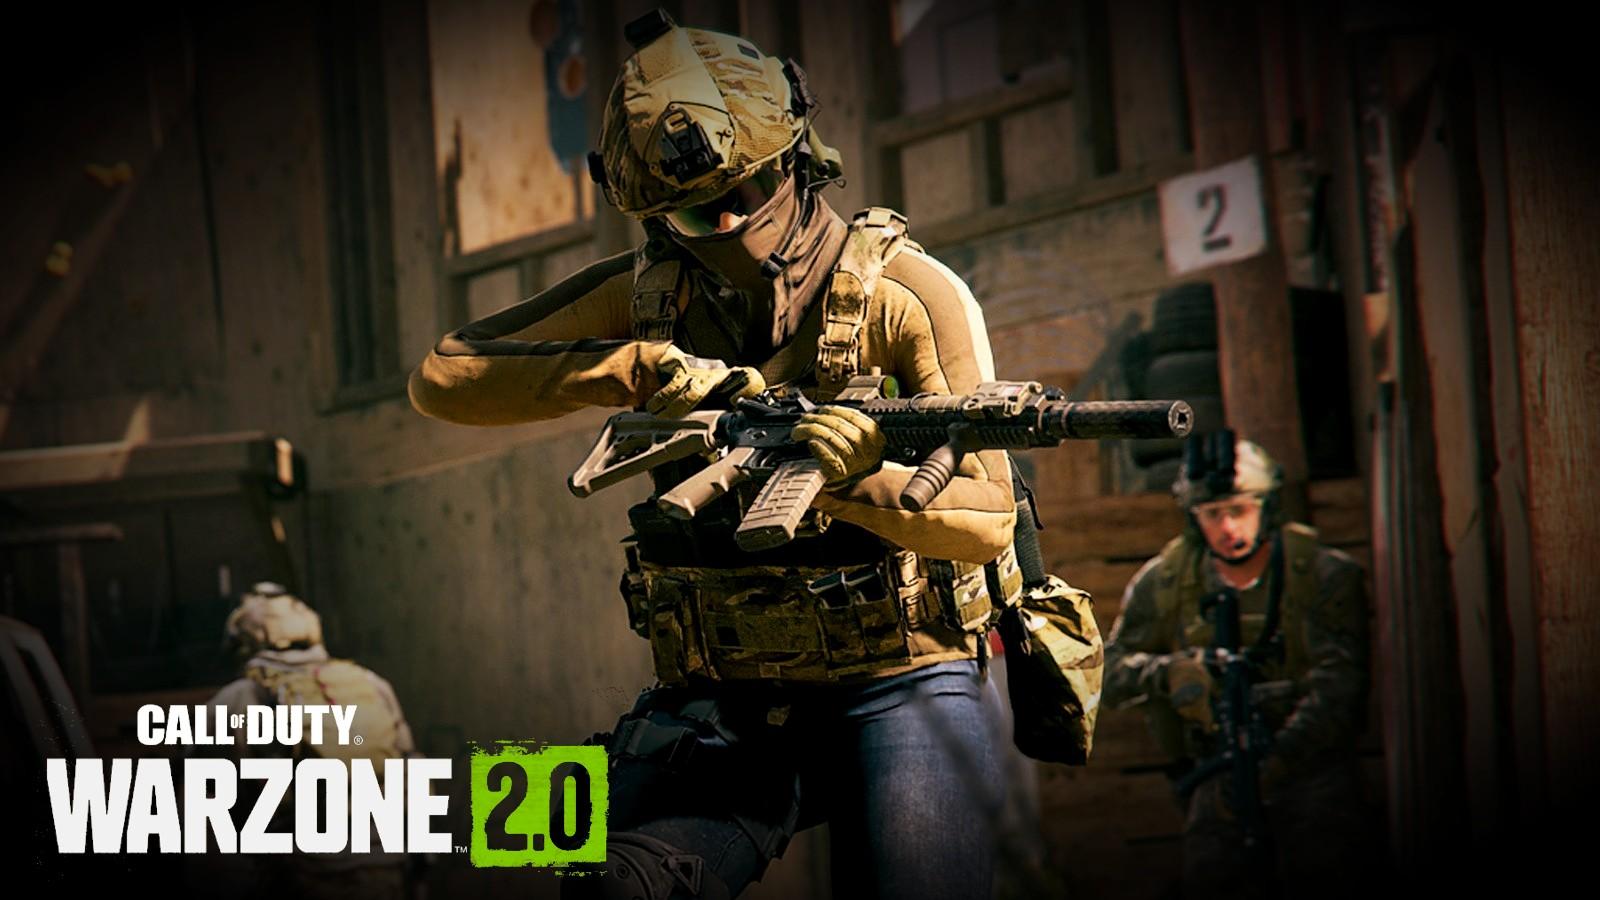 How to download just Warzone 2 (not Modern Warfare 2) on PC - Dot Esports